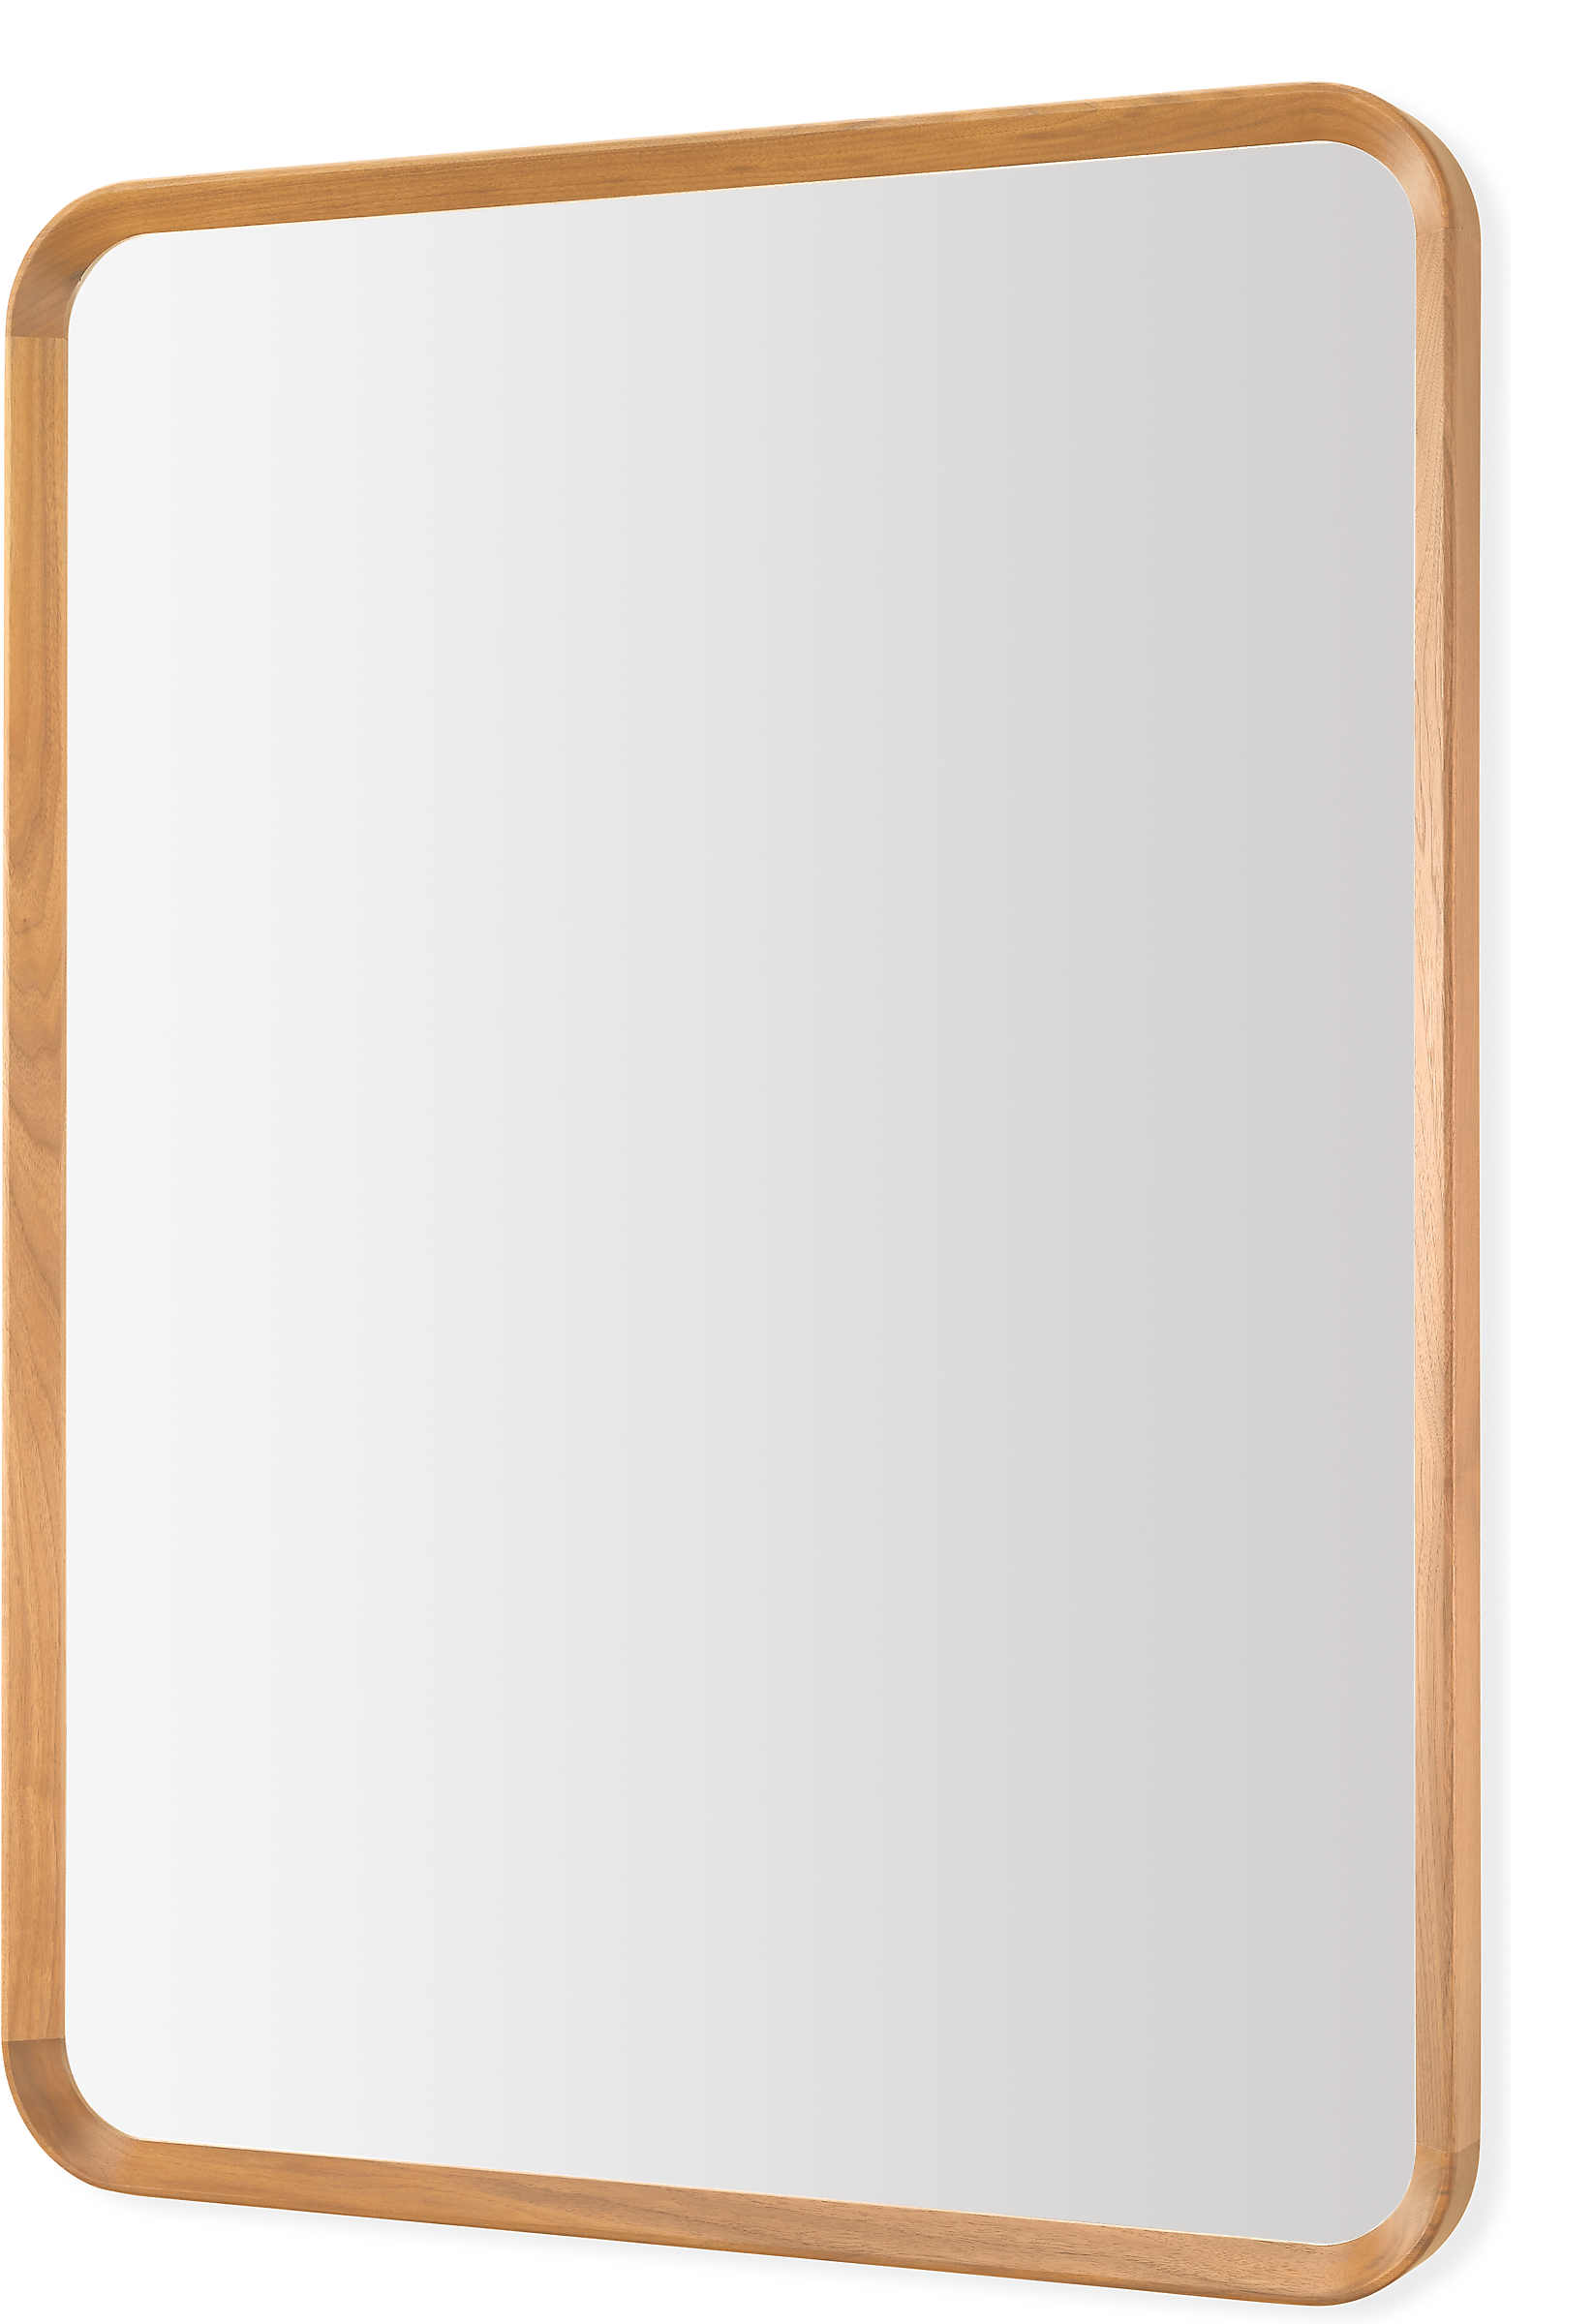 Donahue 31w 1.75d 41h Wall Mirror